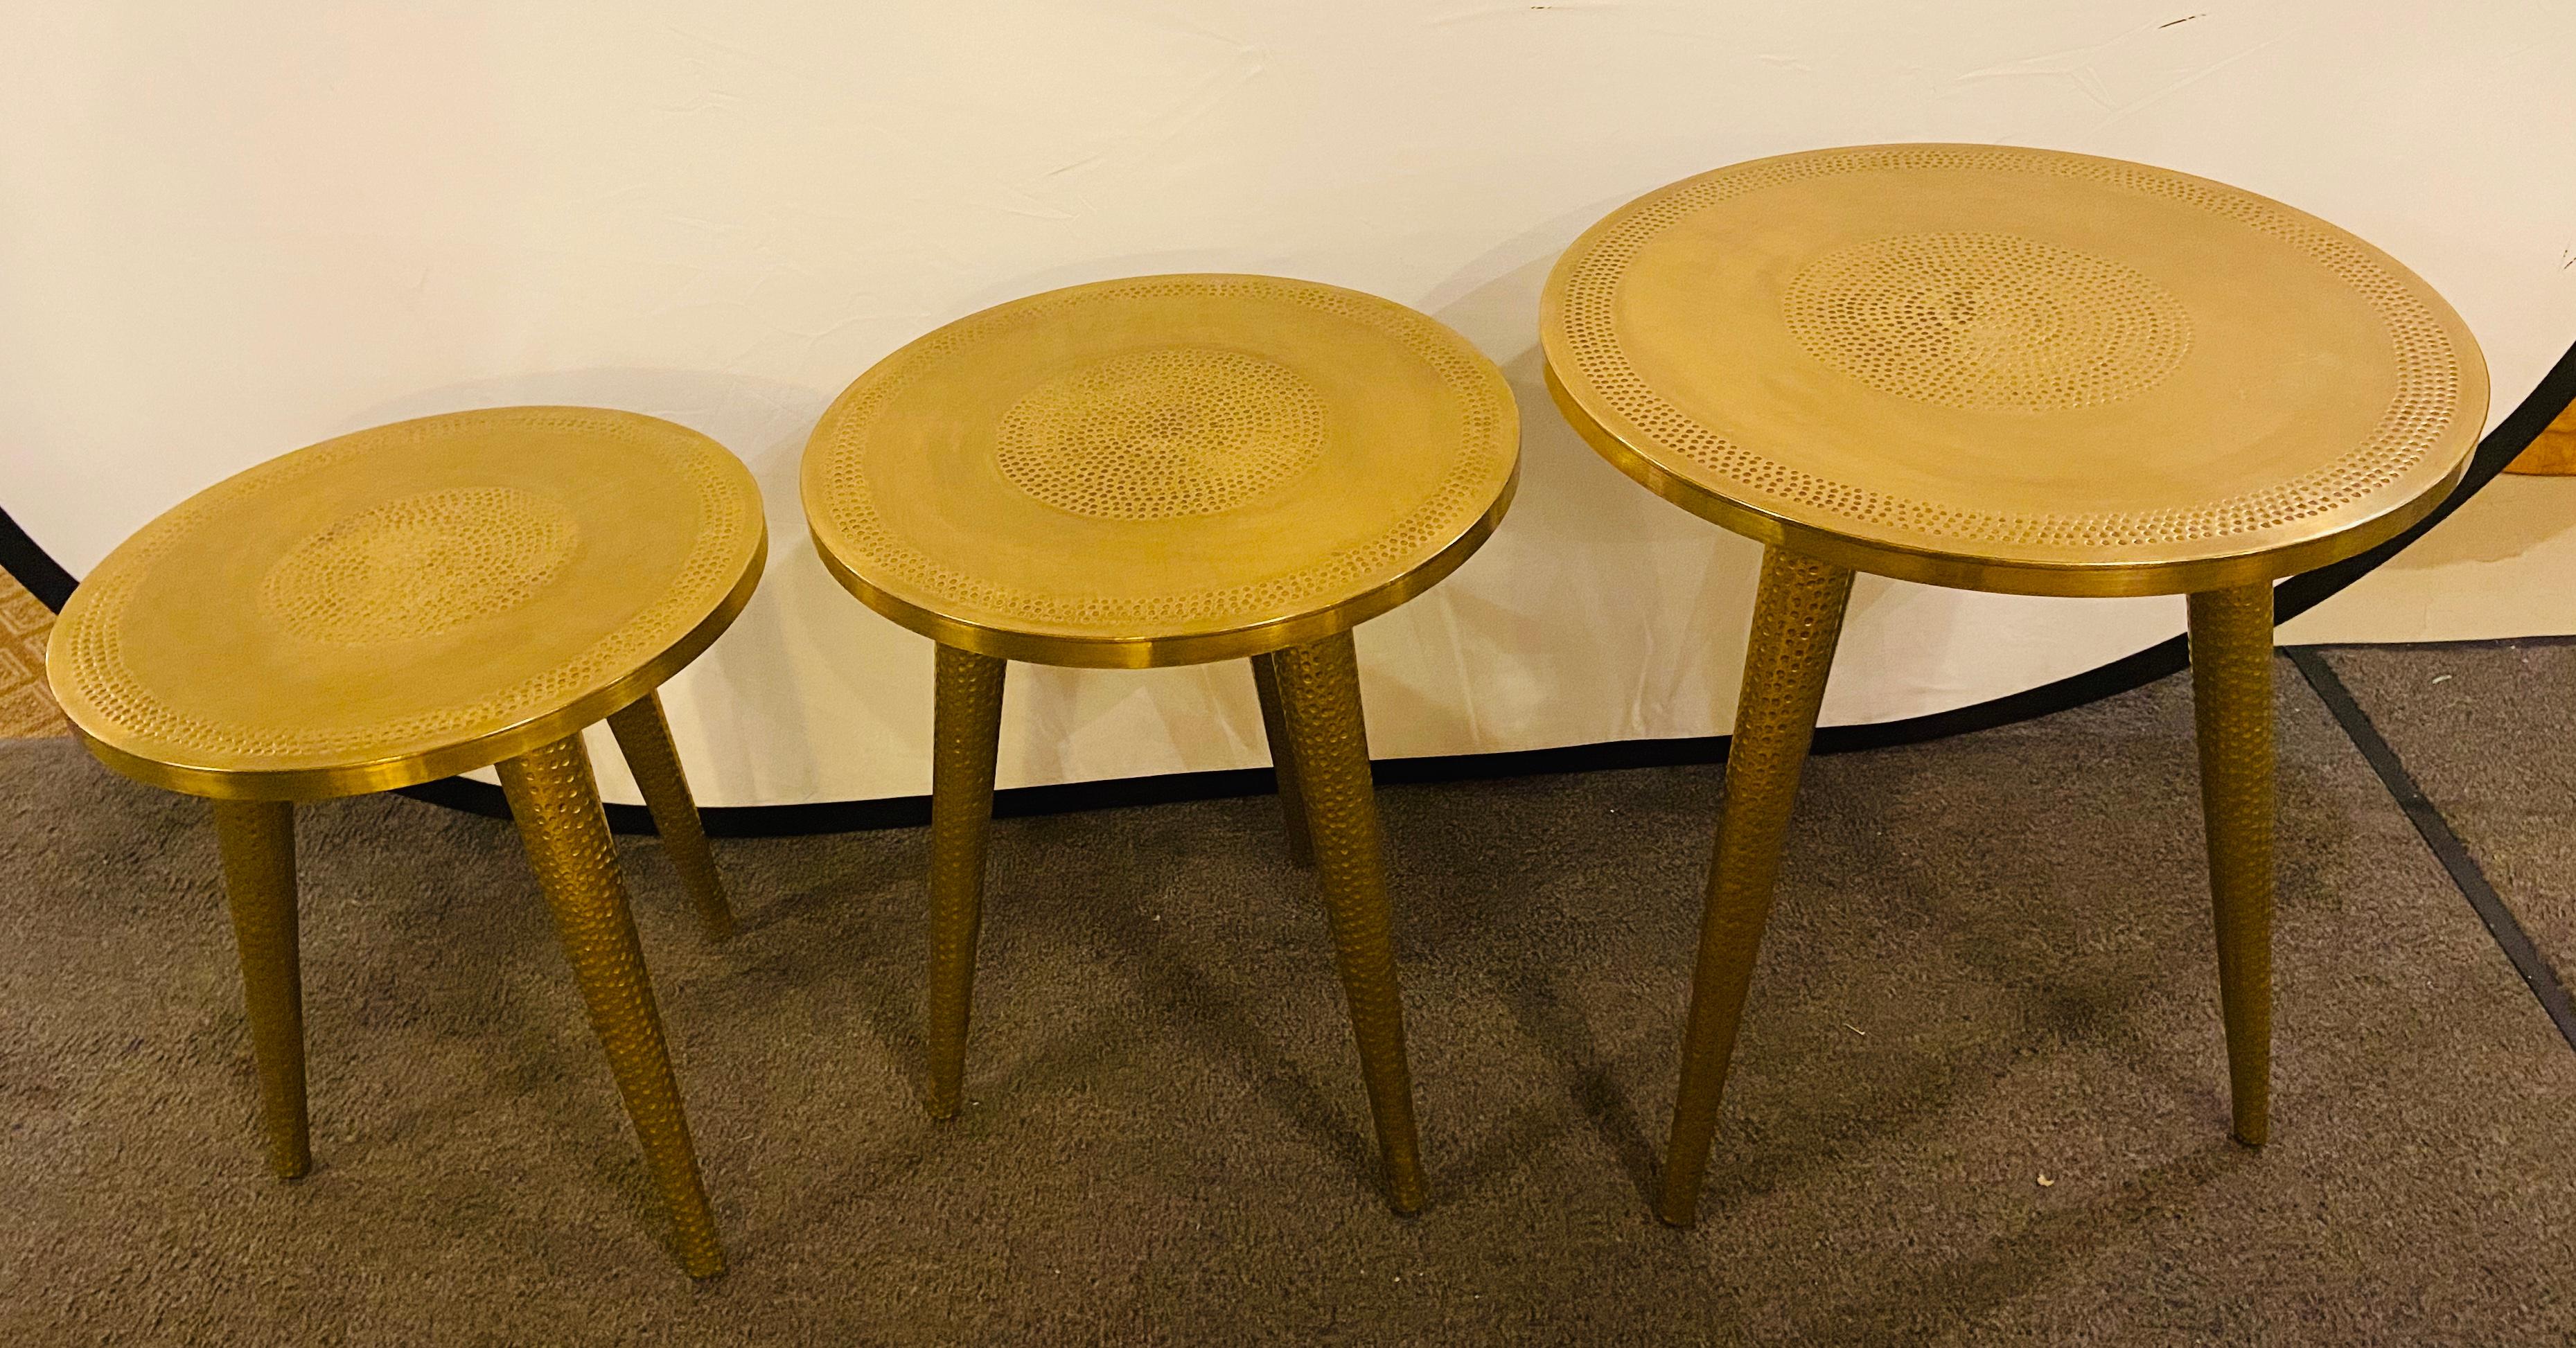 Set of three hand-hammered brass Mid-Century Modern style nesting side tables. Each table features beautifully handcrafted base and circular tops. The set of nesting tables is an elegant touch to any living environment and style each having tapering